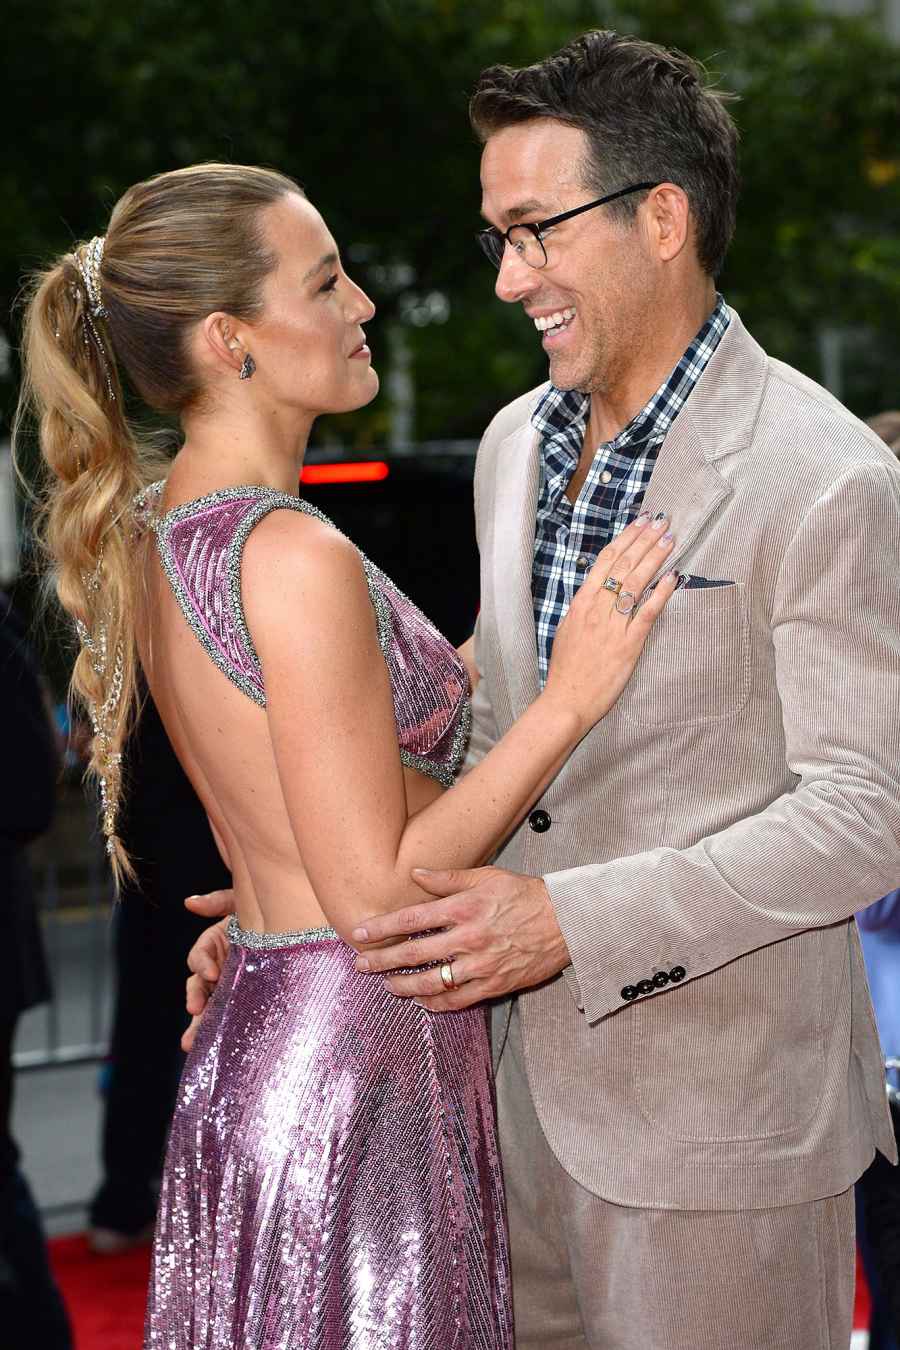 Blake Lively and Ryan Reynolds Are the Definition of Couple Goals on Free Guy Red Carpet 5